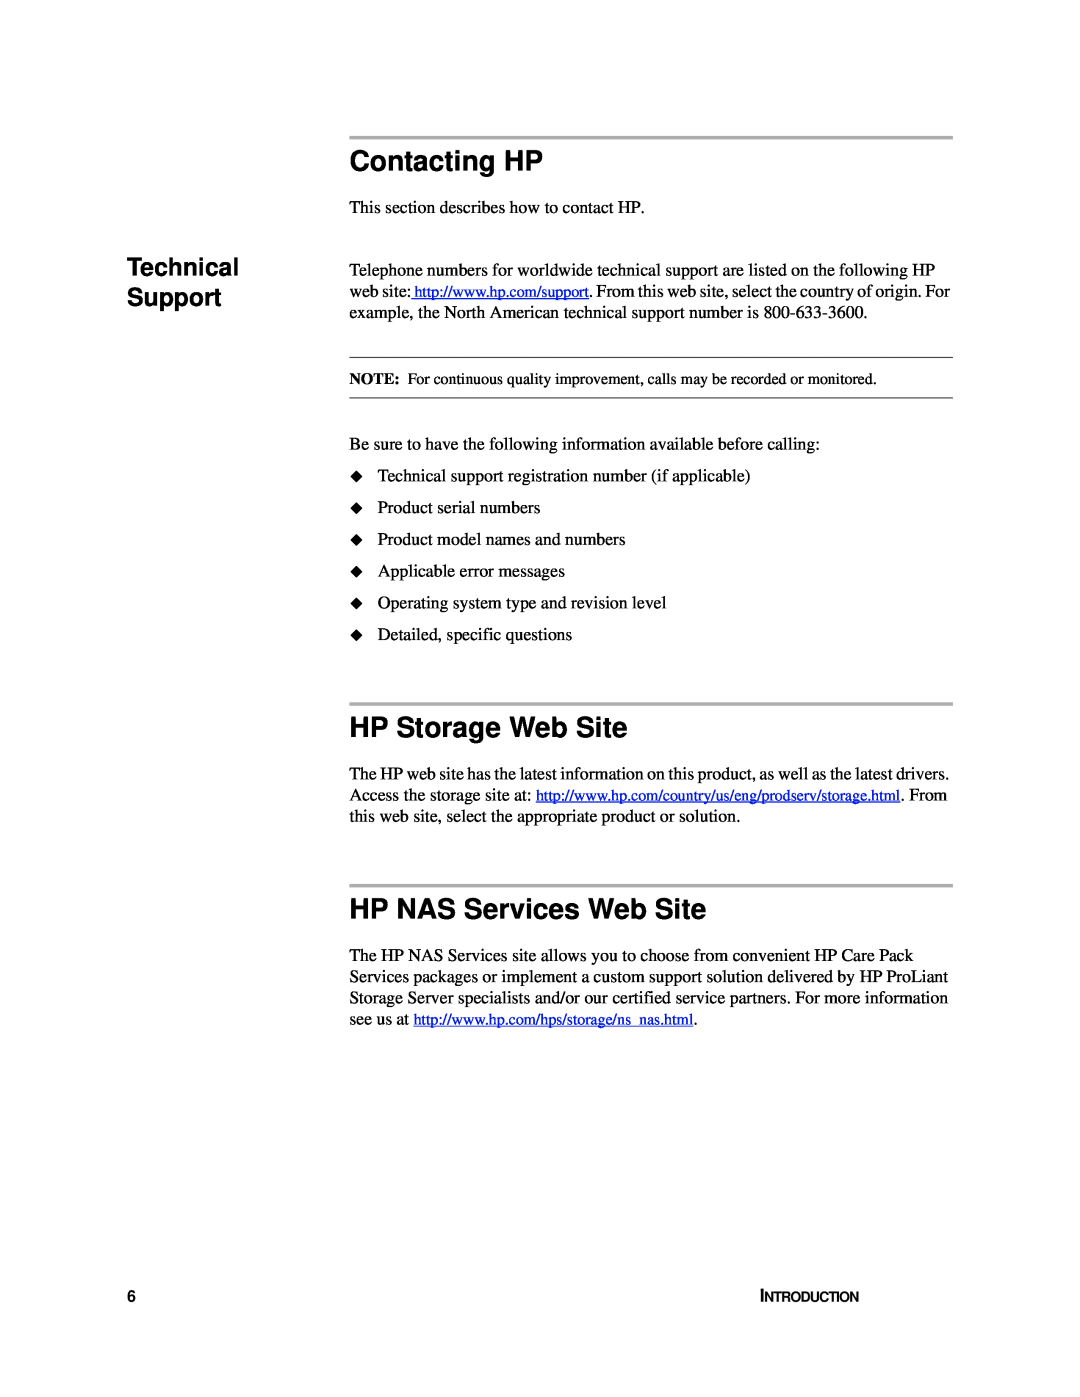 HP Enterprise File Services WAN Accelerator manual Contacting HP, HP Storage Web Site, HP NAS Services Web Site 